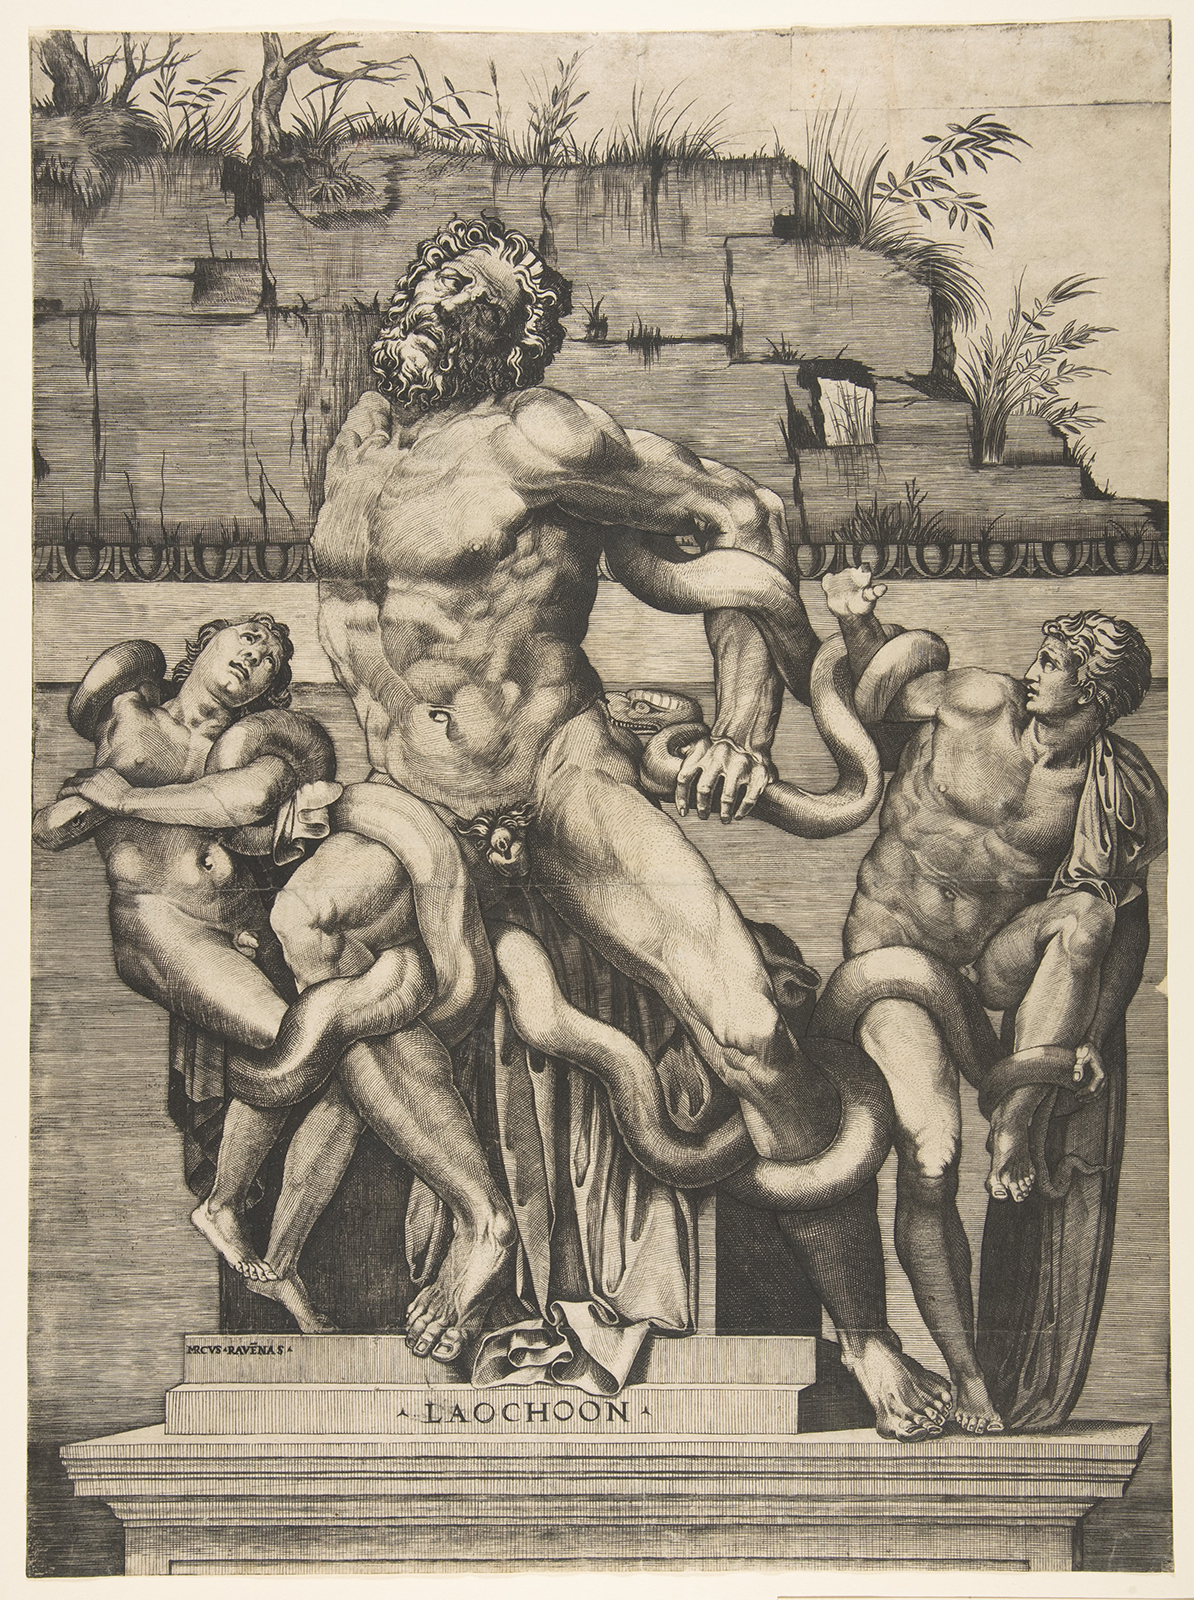 Engraving of a statue of three nude men and snakes in front of a fresco of plants